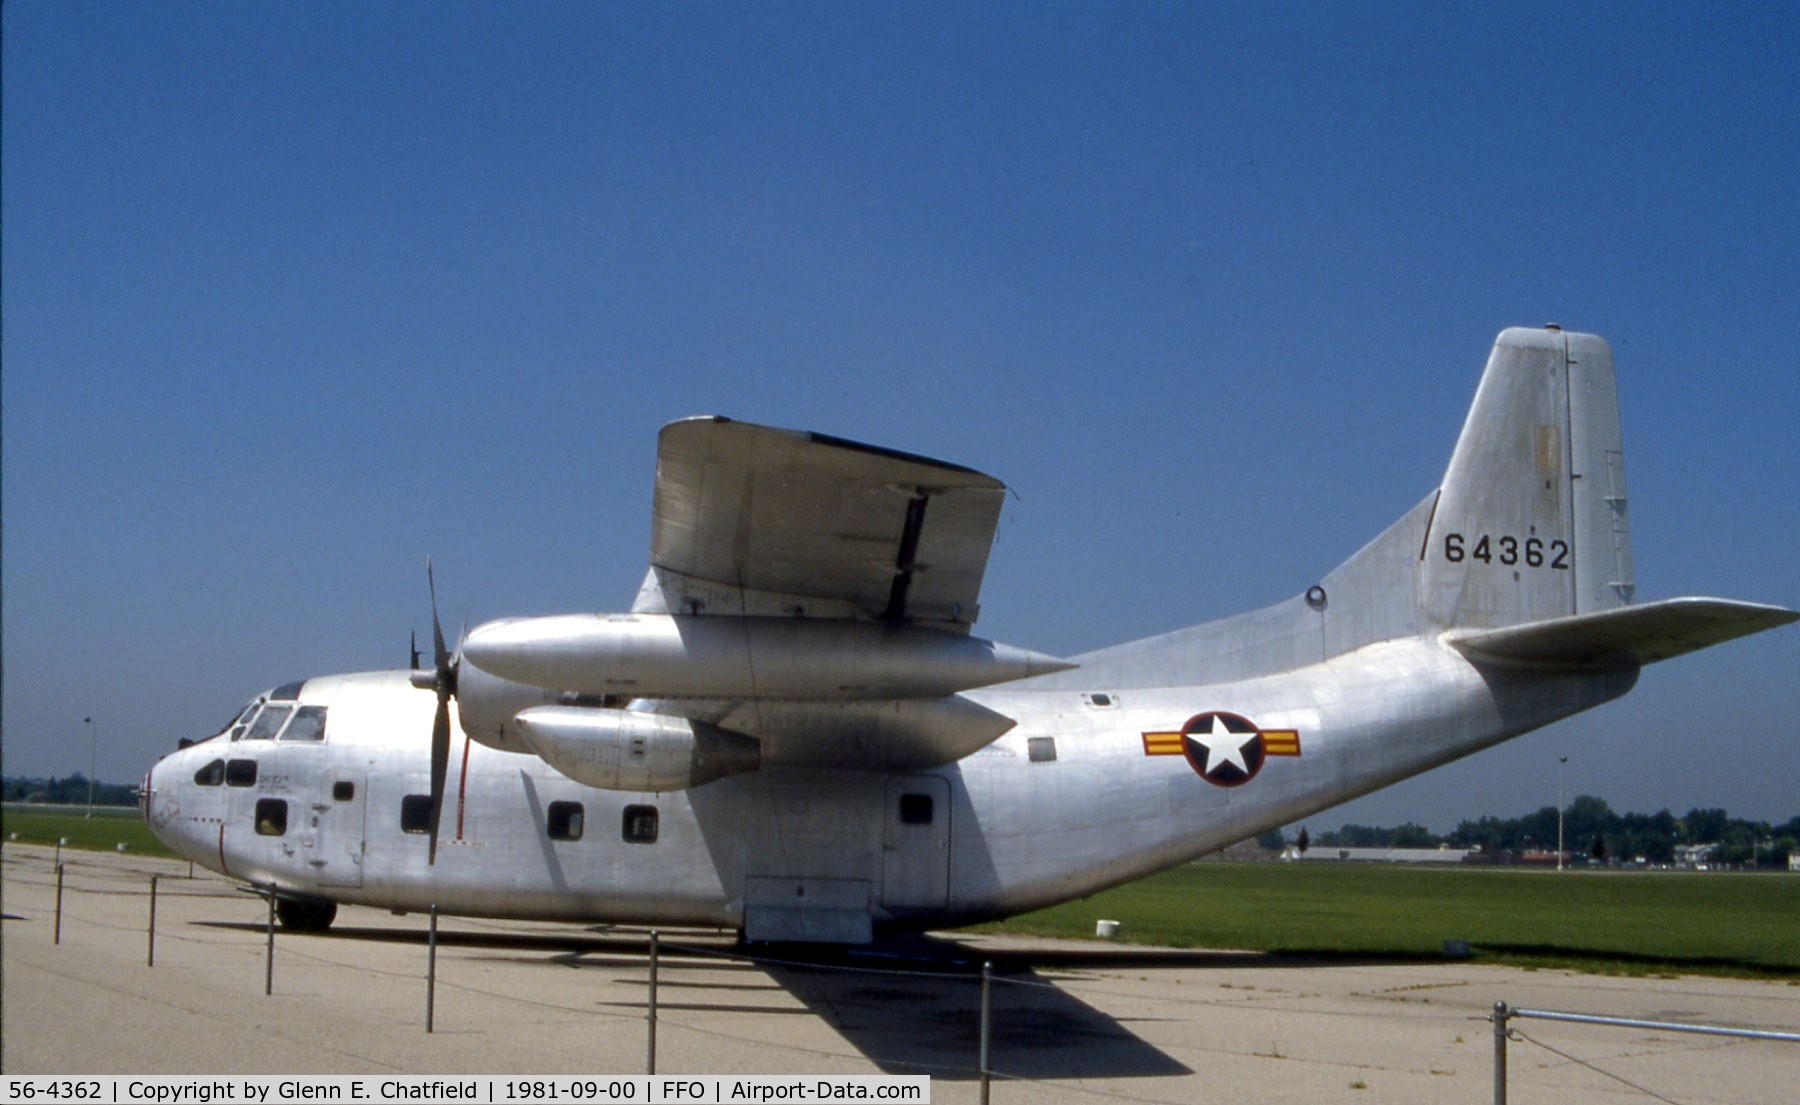 56-4362, 1956 Fairchild C-123K-17-FA Provider C/N 20246, C-123K at the National Museum of the U.S. Air Force